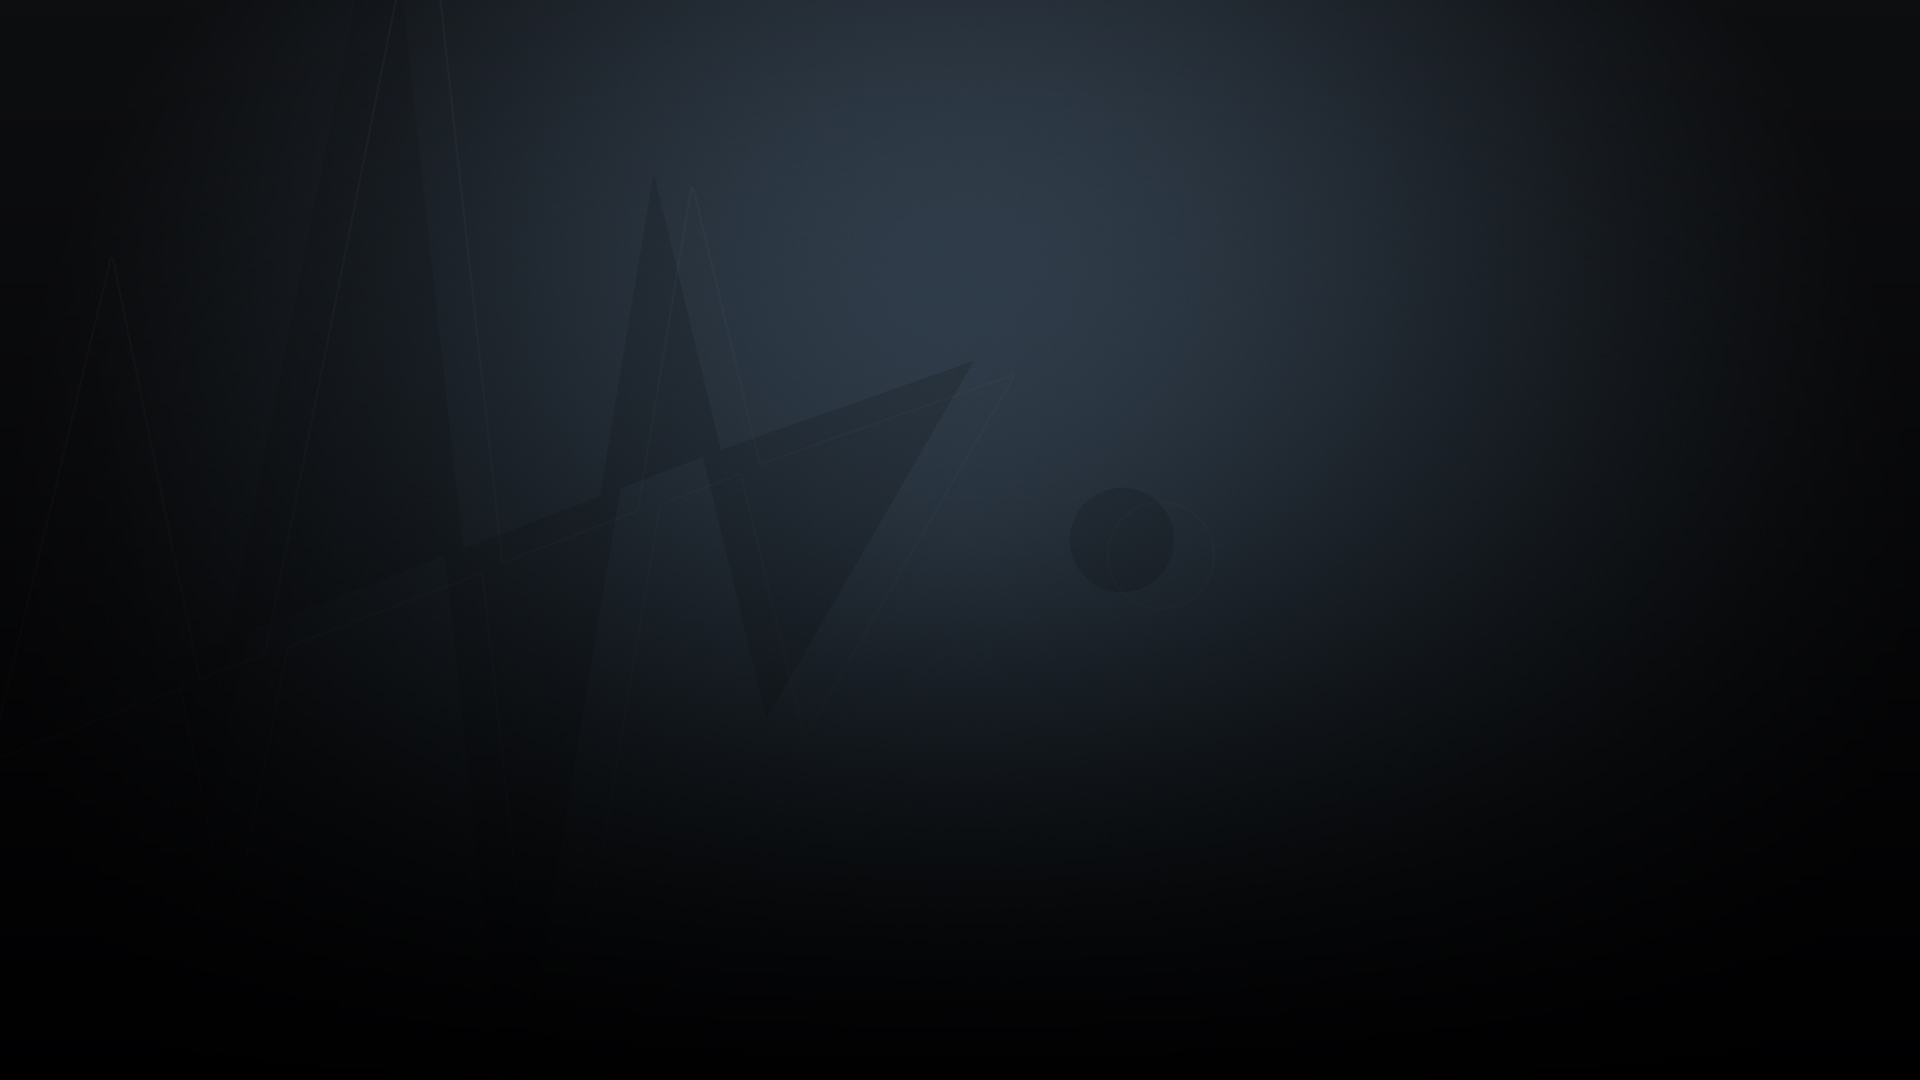 A dark, gradient background with a faint light source illuminating an abstract, geometric shape resembling a star and a small circle nearby. The atmosphere is mysterious and the shapes are barely visible, emerging from the darkness.